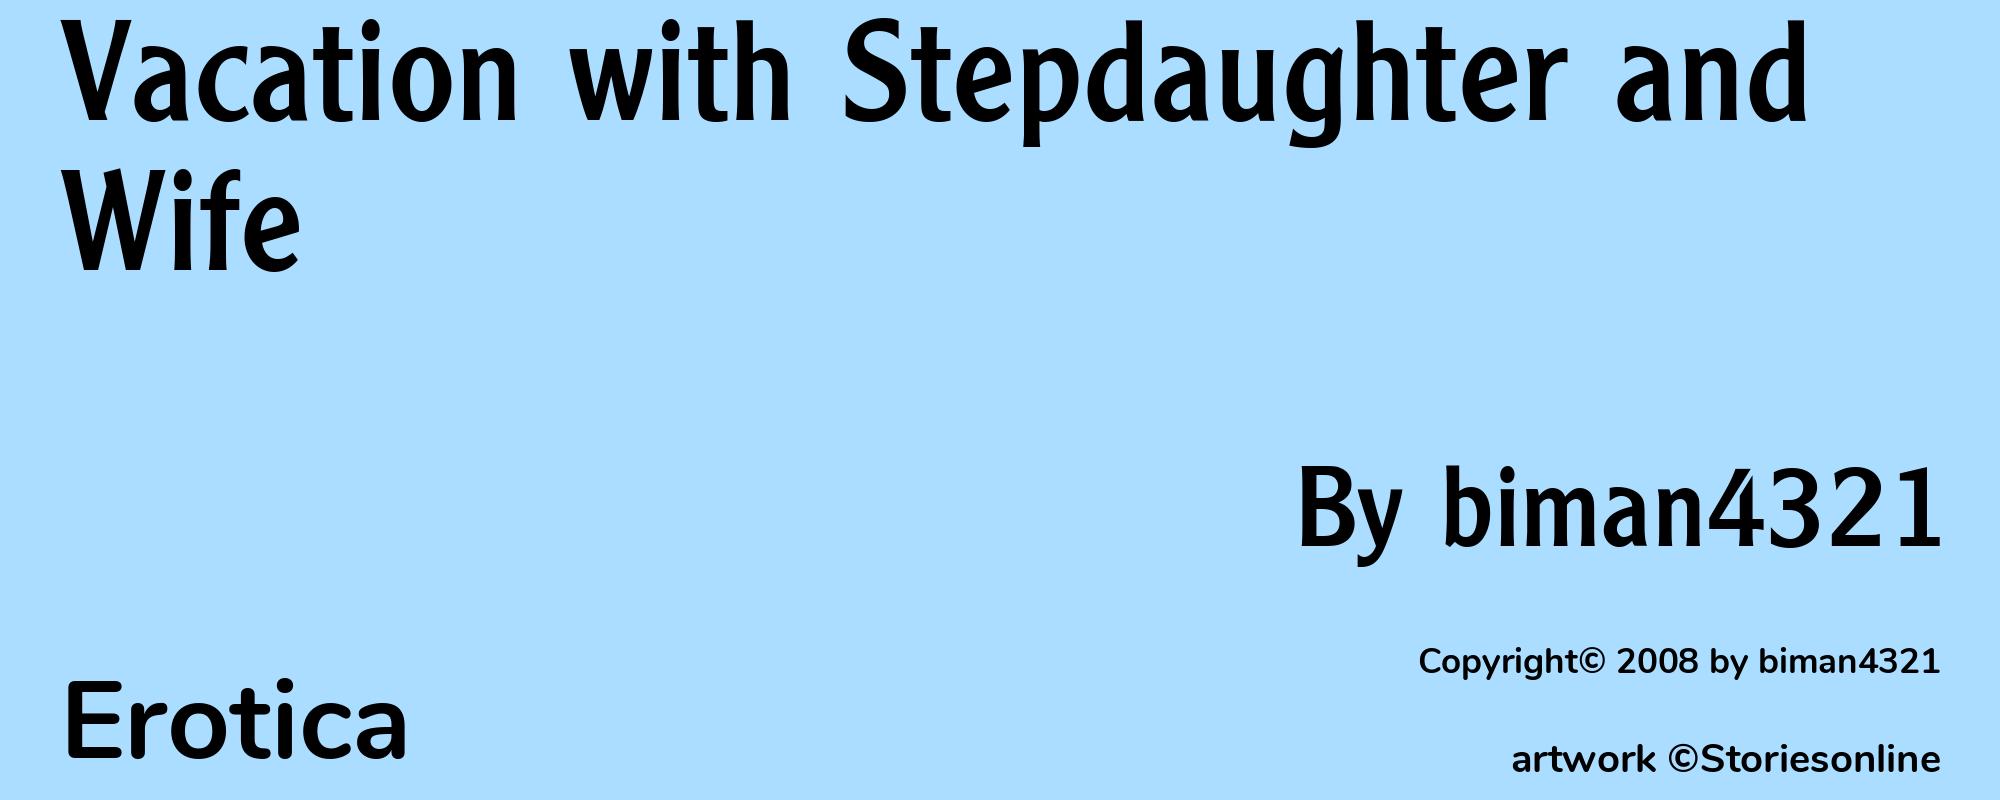 Vacation with Stepdaughter and Wife - Cover